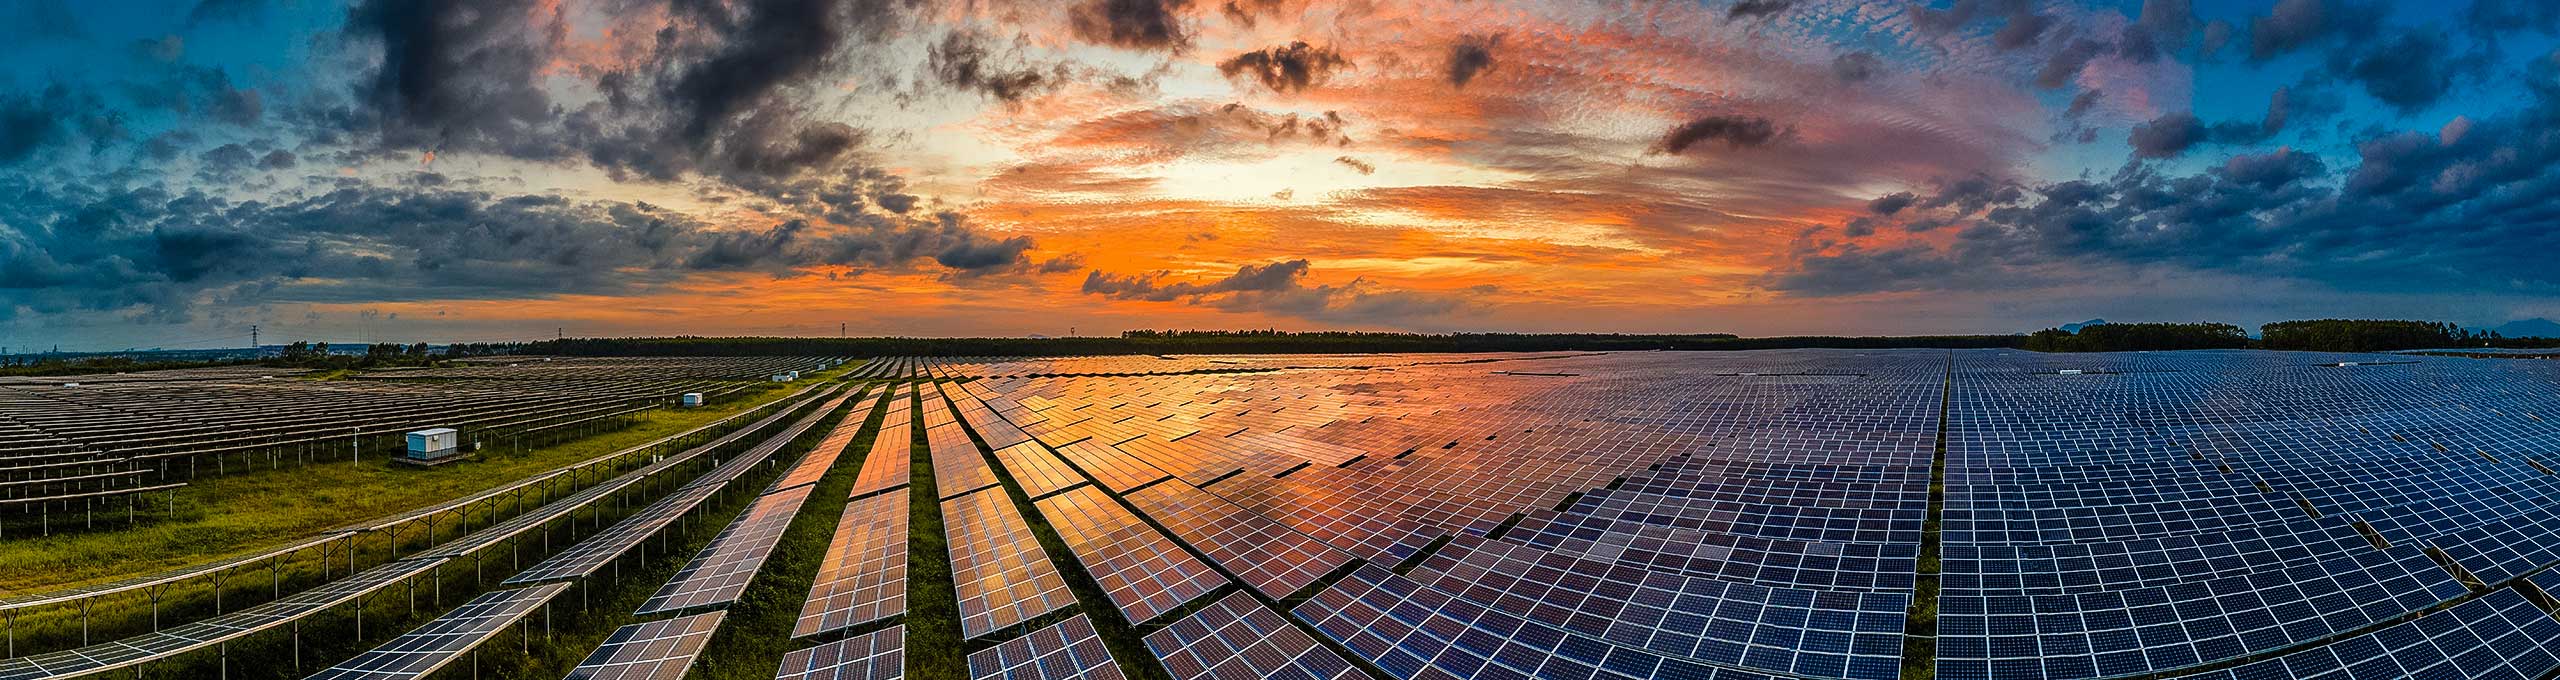 A field of solar panels at sunset